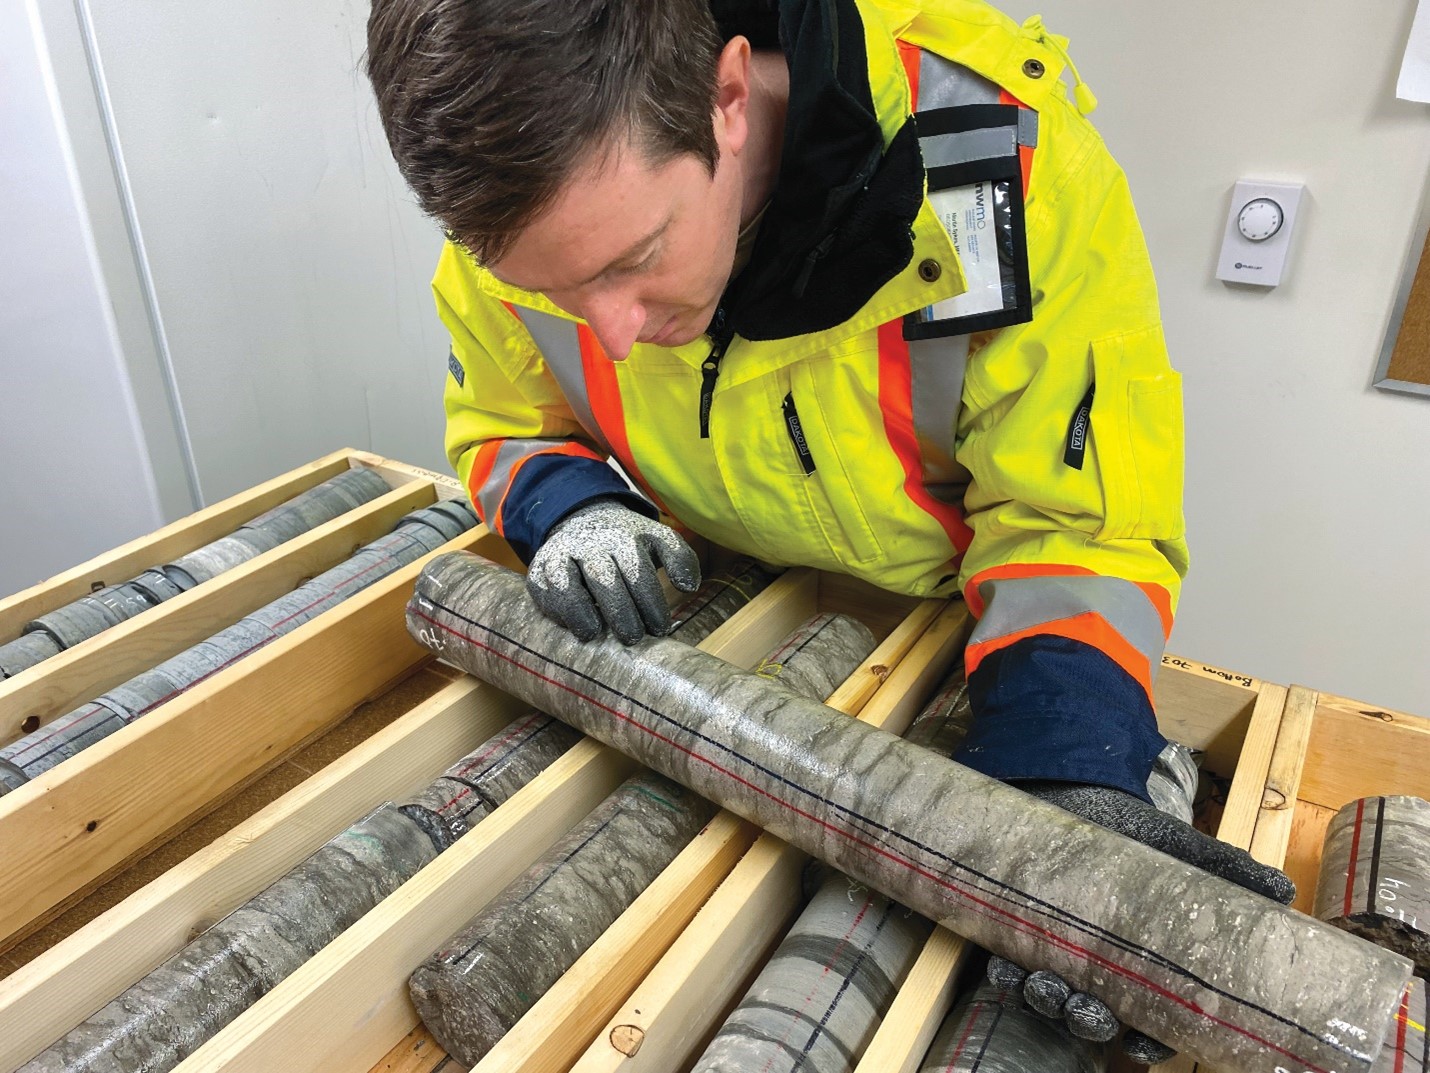 Senior geoscientist at the NWMO examines core samples pulled from rock in South Bruce, Ont., as part of investigations to support safe storage of used nuclear fuel in proposed deep geological repository.